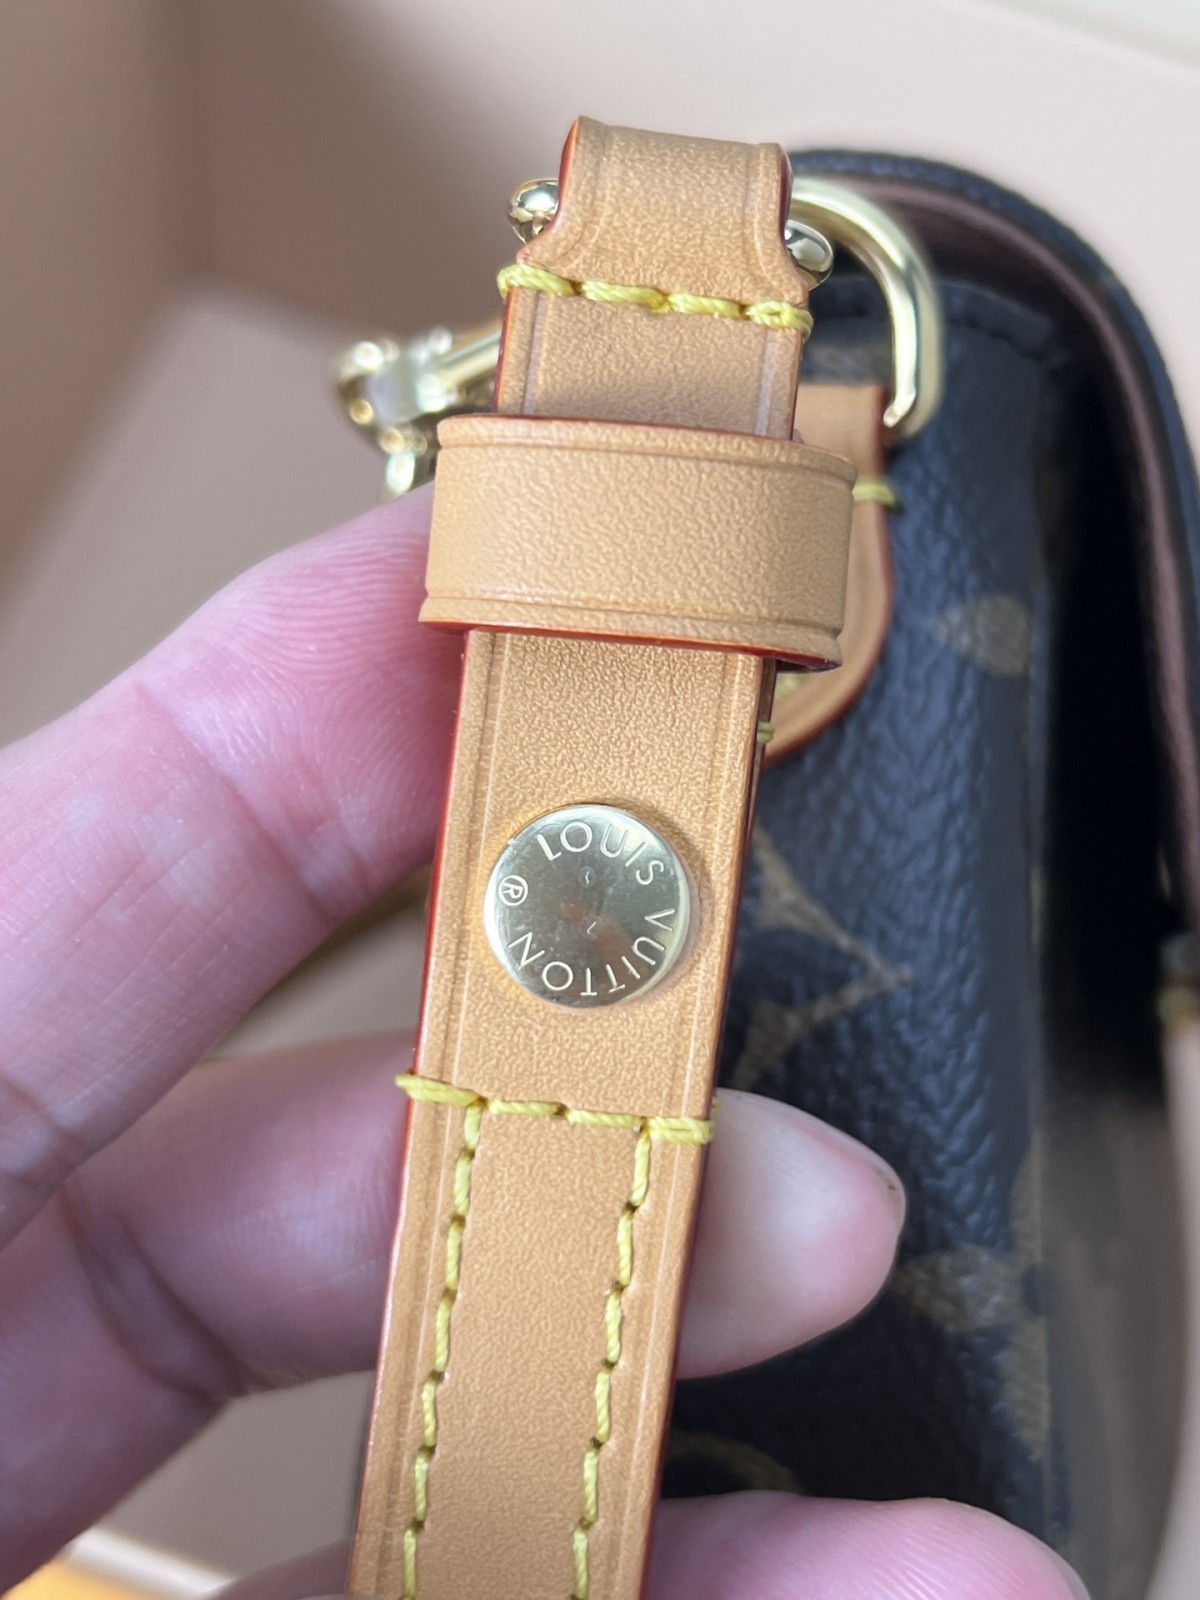 How good quality is a M81911 LOUIS VUITTON WALLET ON CHAIN IVY（2023 new edition）-Best Quality Fake designer Bag Review, Replica designer bag ru